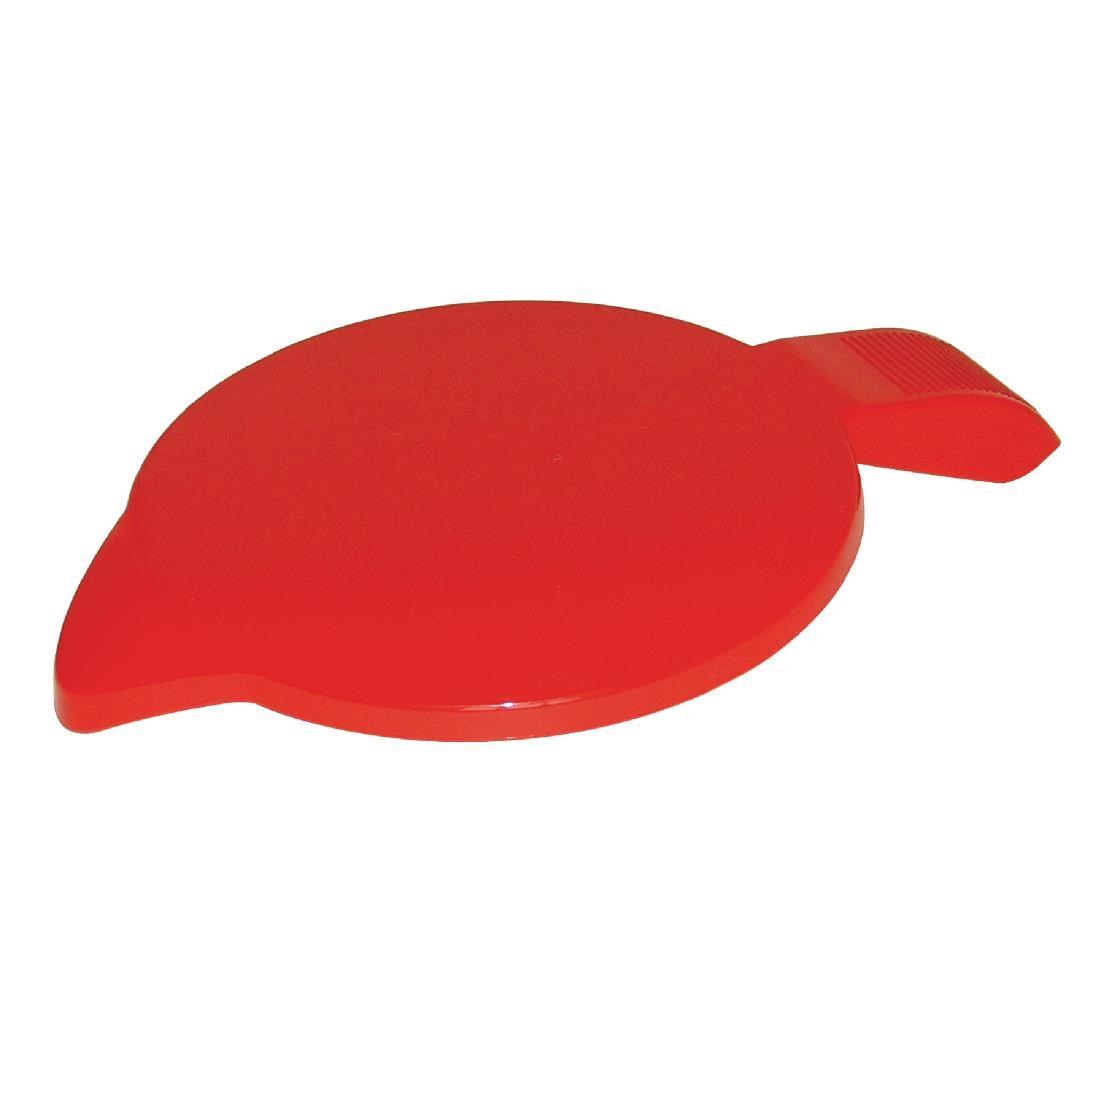 Lid for Olympia Kristallon 1.4 Litre Polycarbonate Jug Red - CE285  - 1